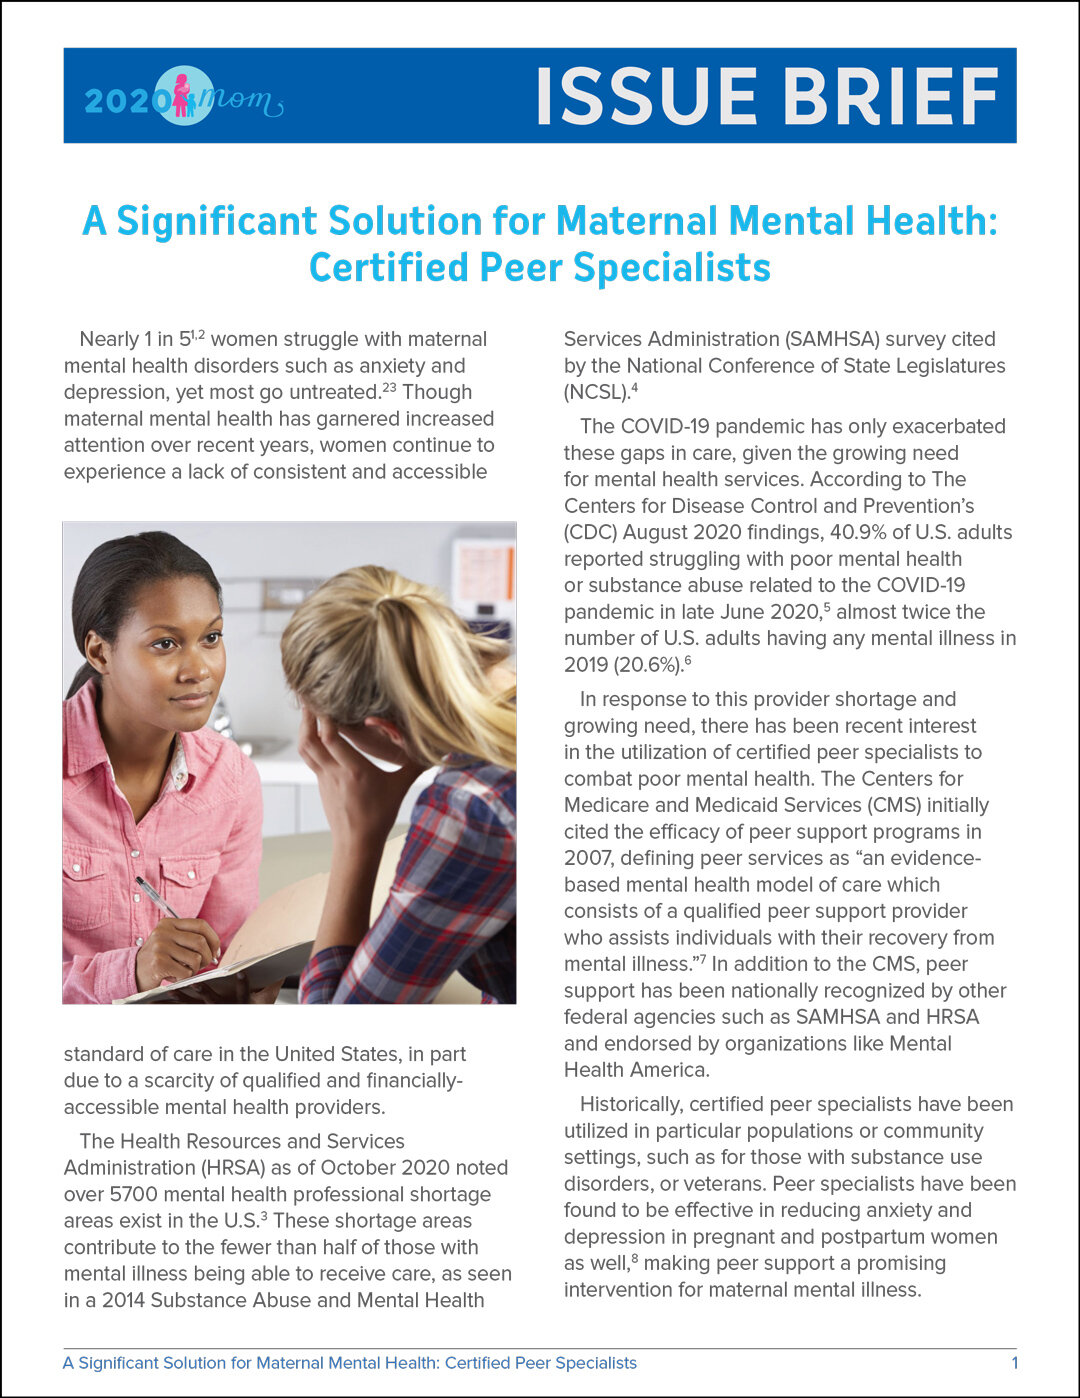 A Significant Solution for Maternal Mental Health: Certified Peer Specialists